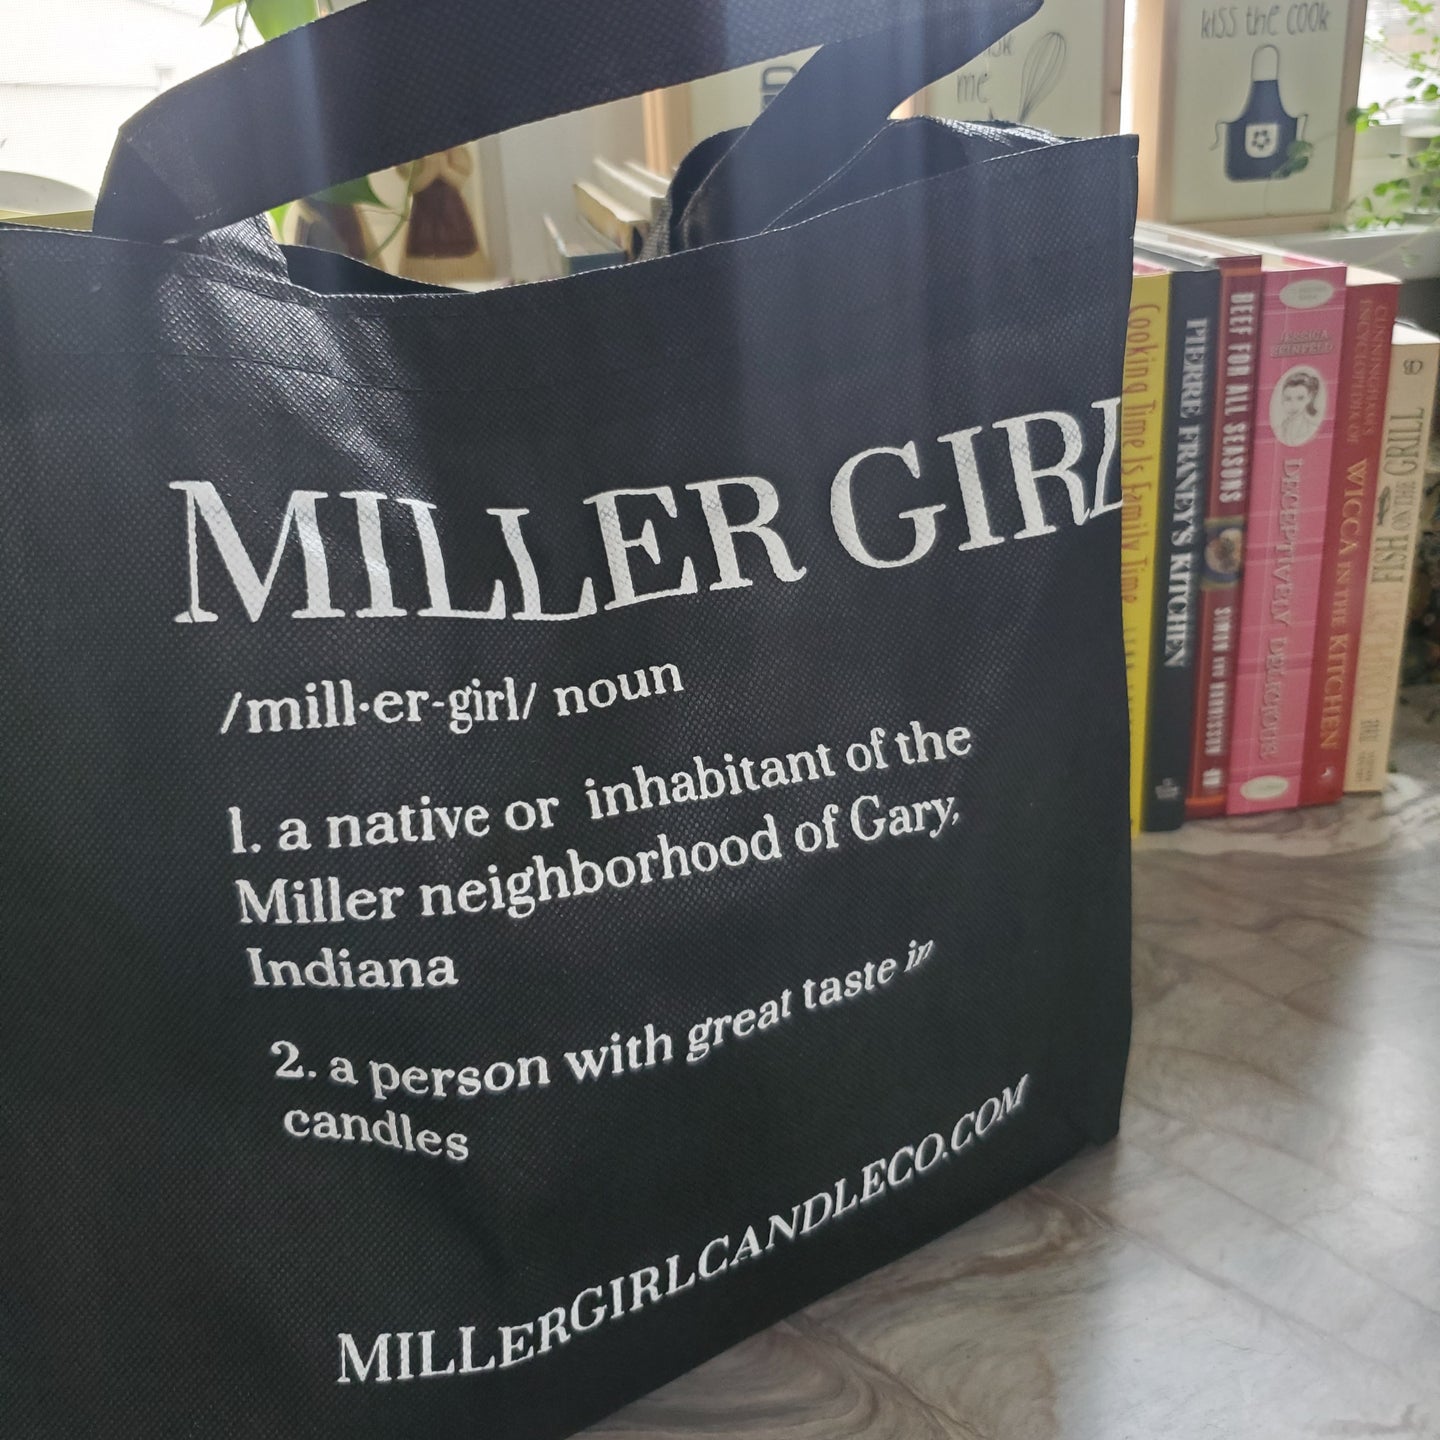 Canvas Miller Girl Tote